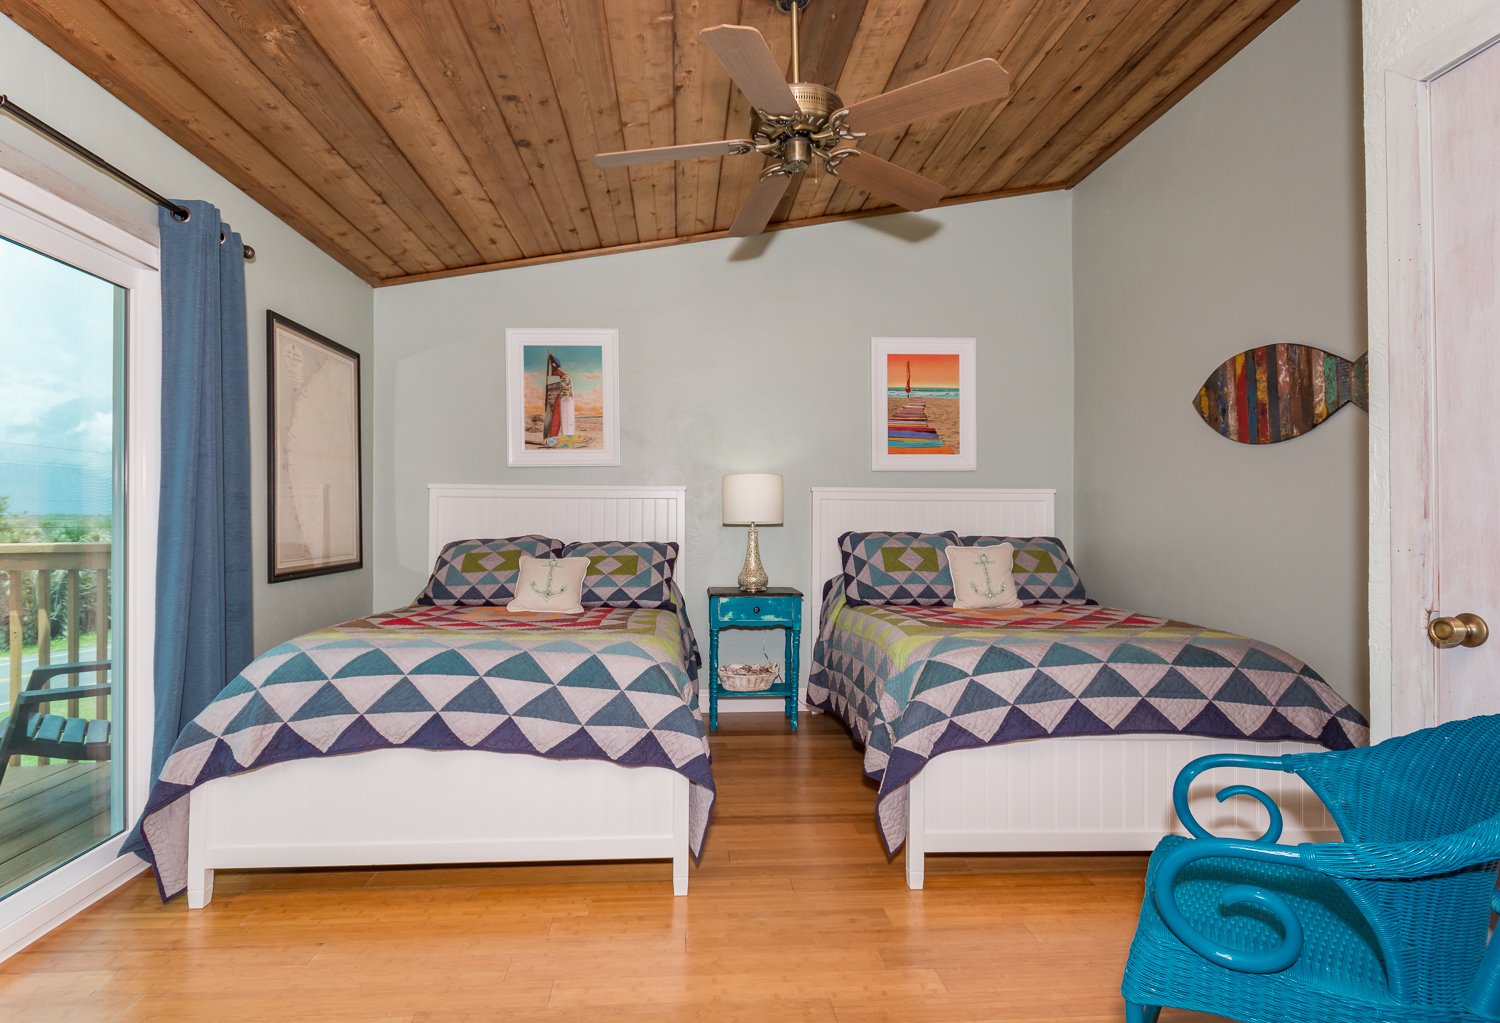 2nd level guest room of this New Smyrna Vacation Home with 2 full beds and colorful sheets.